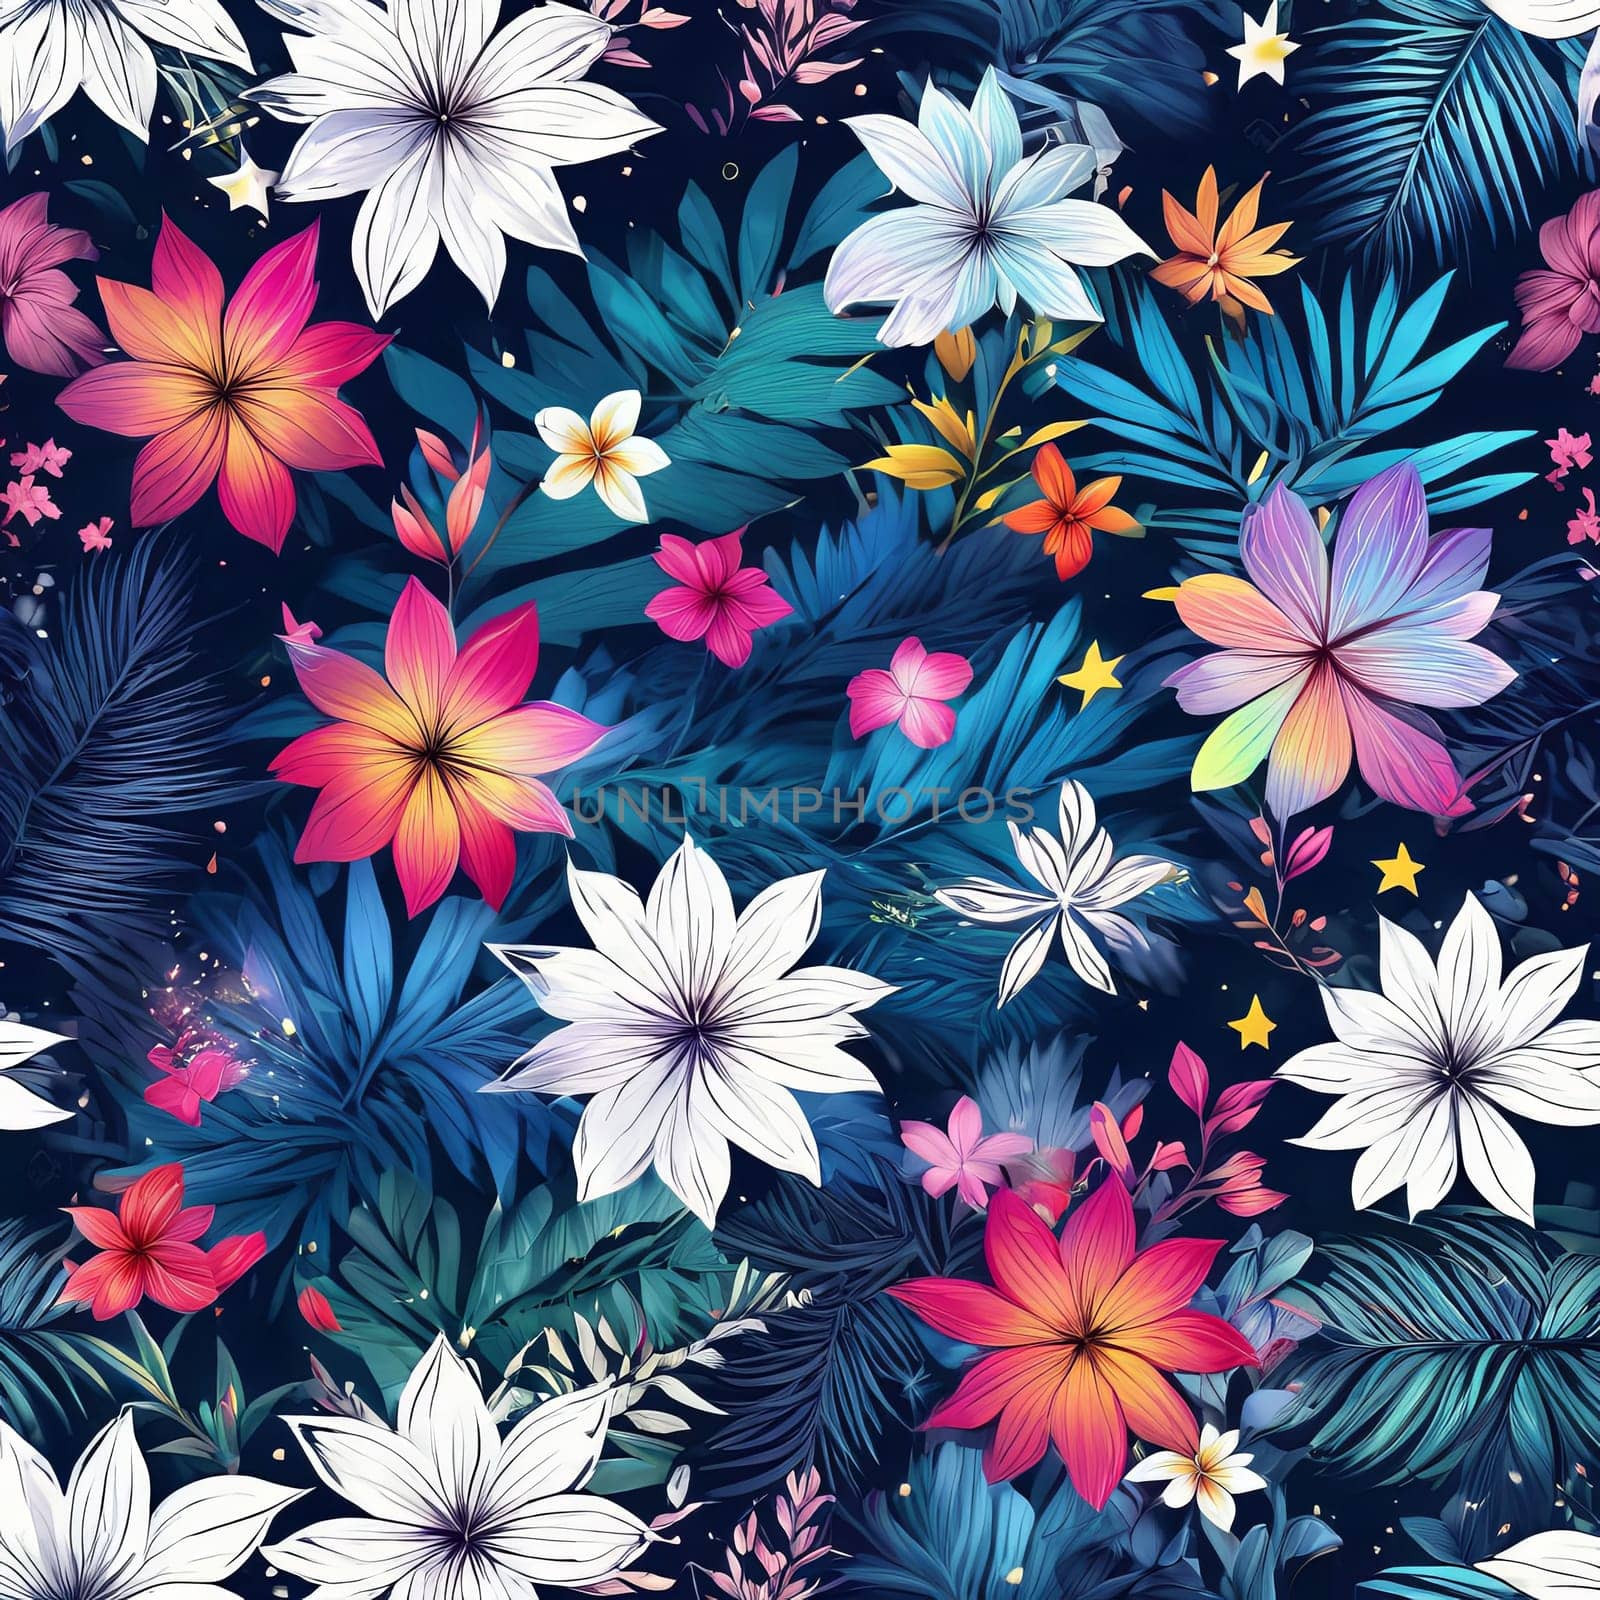 Striking, colorful flower painting with intricate details, vivid hues, beautifully contrasted against dark, black background. For interior design, textiles, clothing, gift wrapping, web design, print. by Angelsmoon